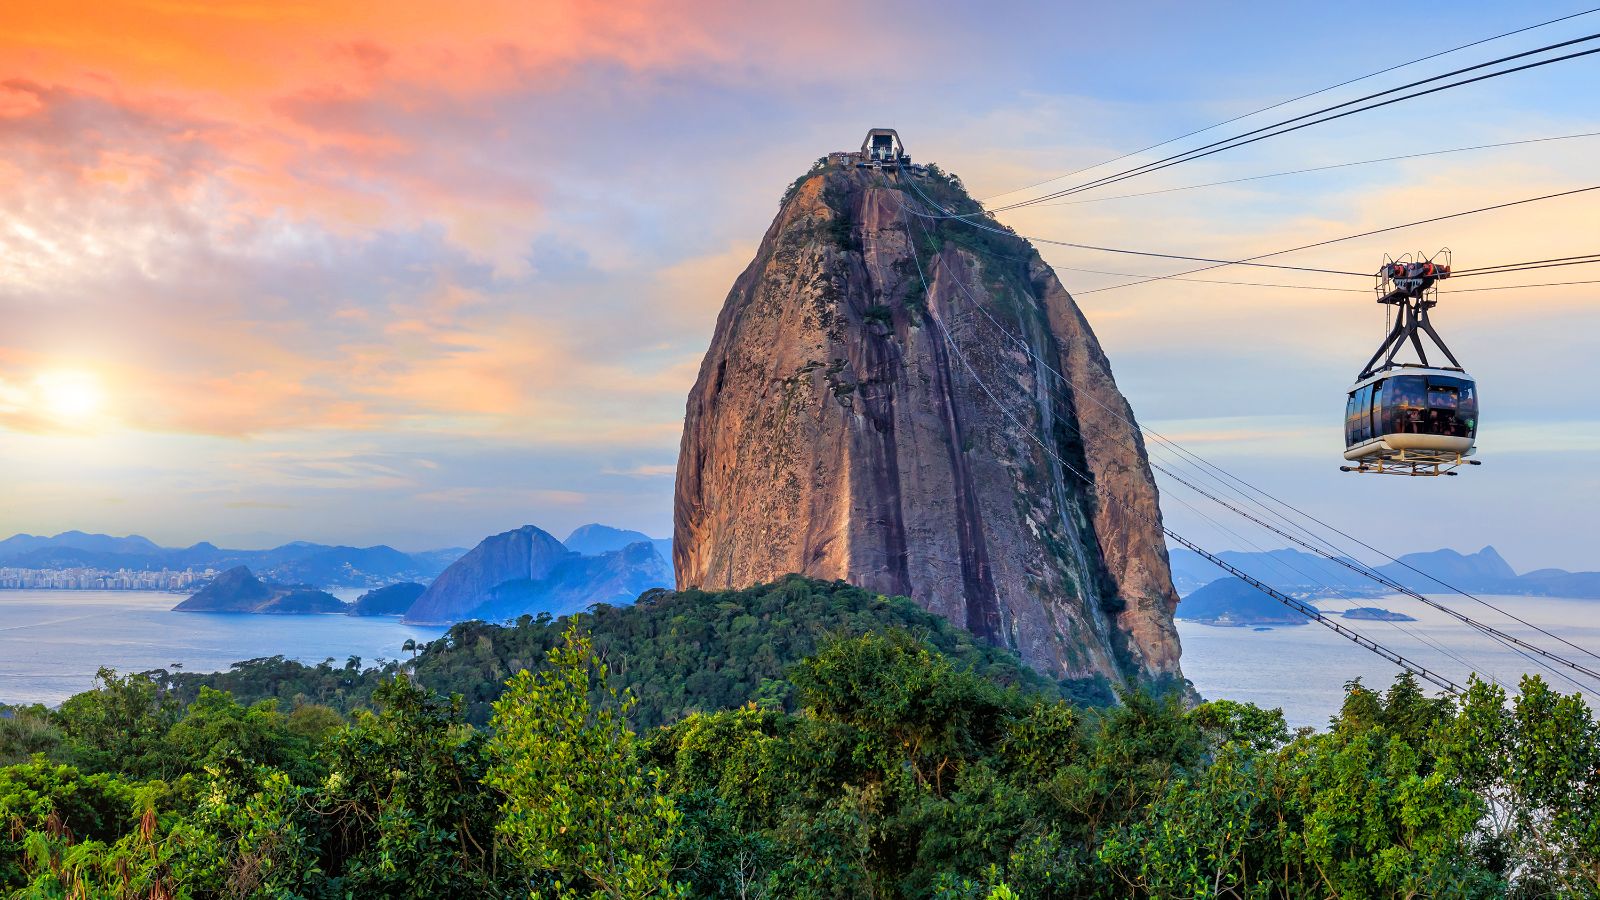 Cable car going up Sugarloaf Mountain in Rio de Janeiro Brazil during sunset